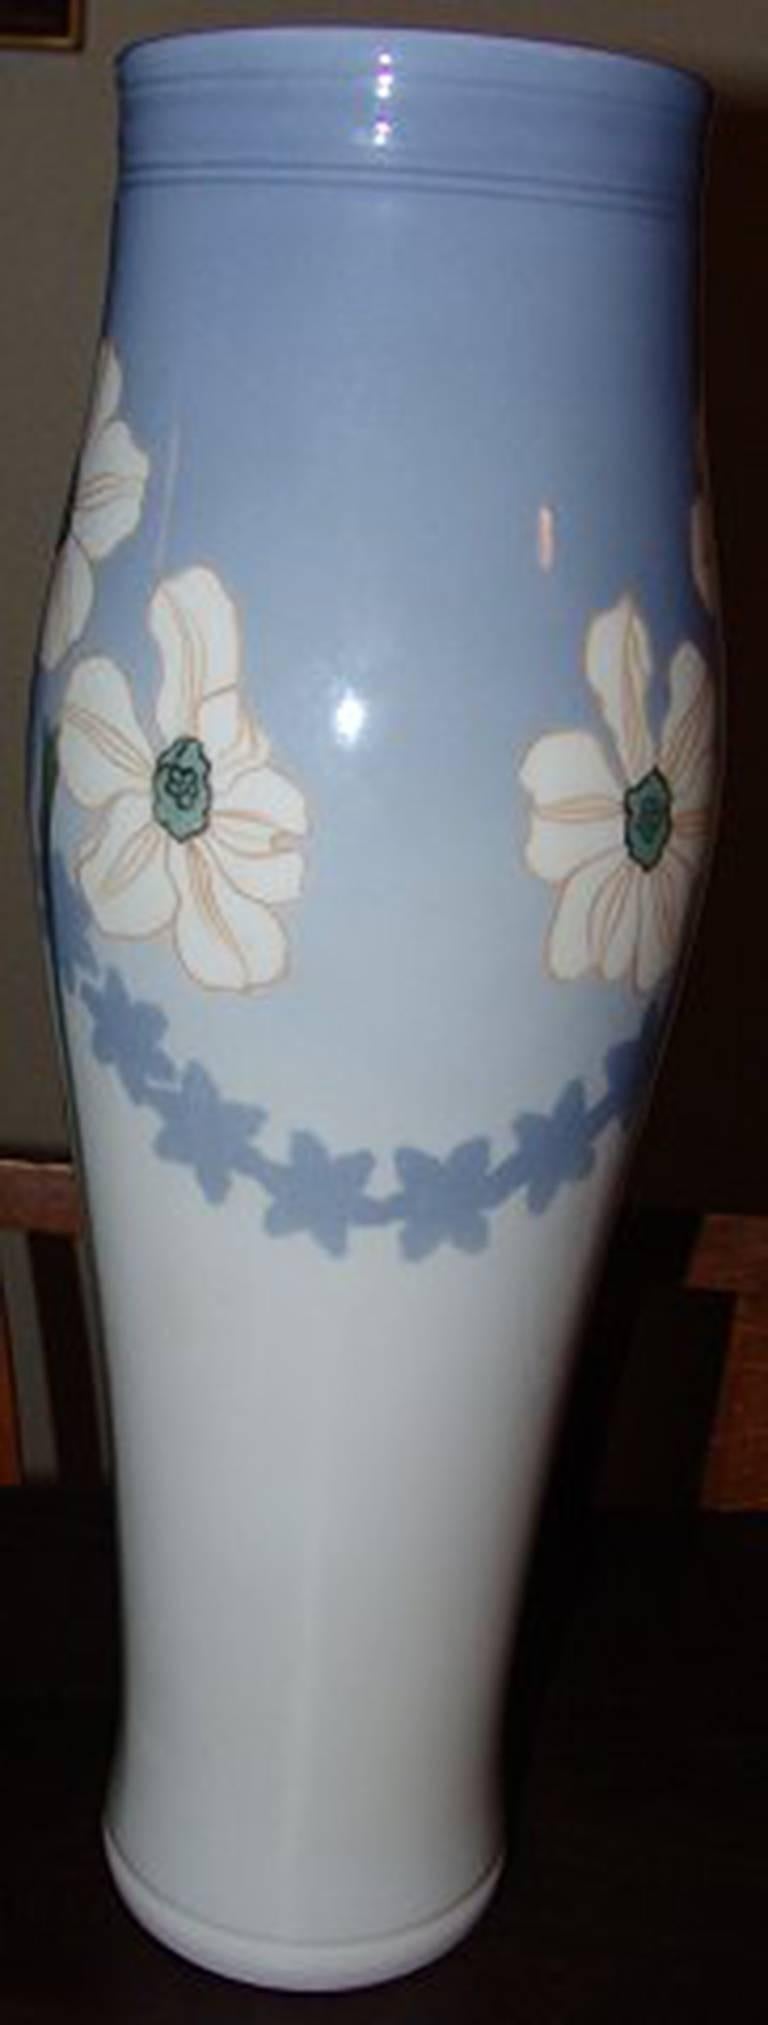 Royal Copenhagen unique vase by Anna Smidth #8486. Measures 45 cm and is in perfect condition. Signed by Anna Smith and date code is 2 and T.